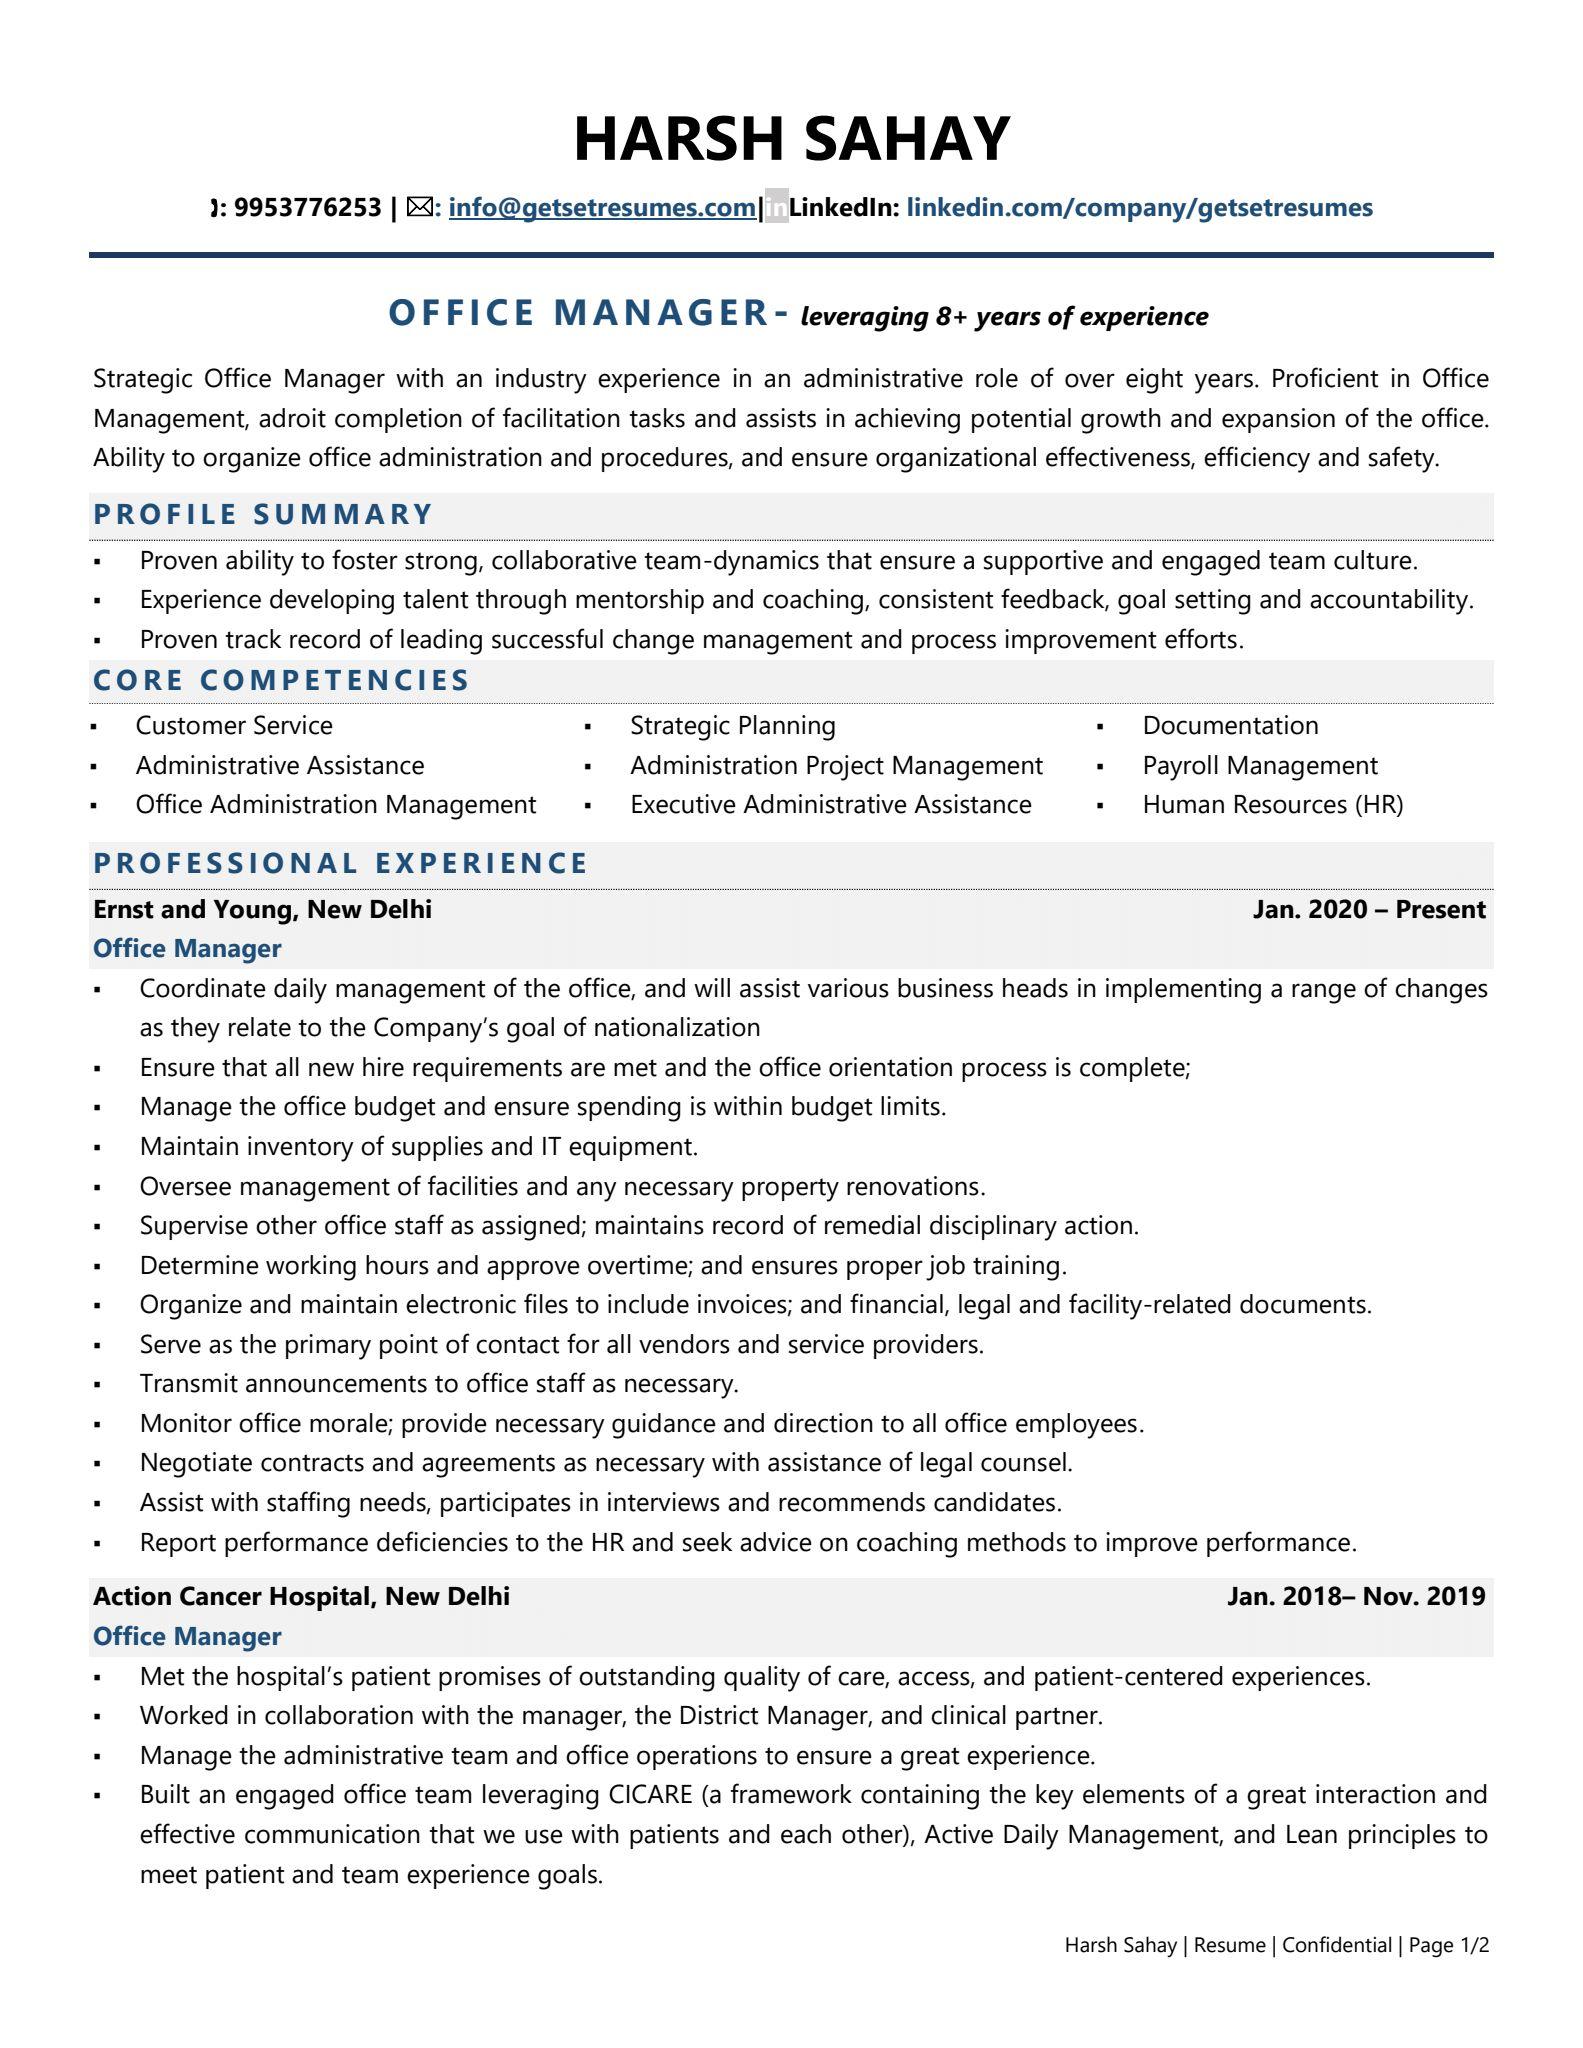 resume for office manager job